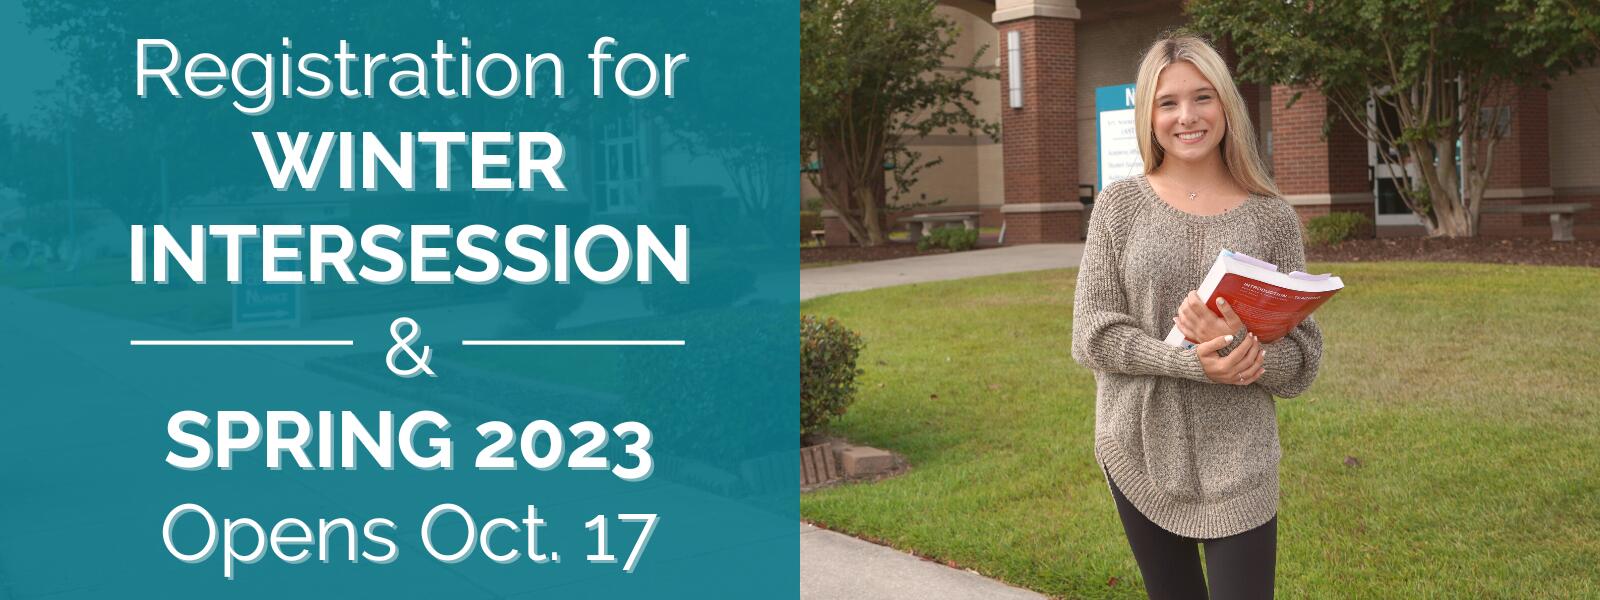 Register Now for Winter Intersession & Spring 2023 Opens Oct. 17 - Click Here to See our Admissions Steps